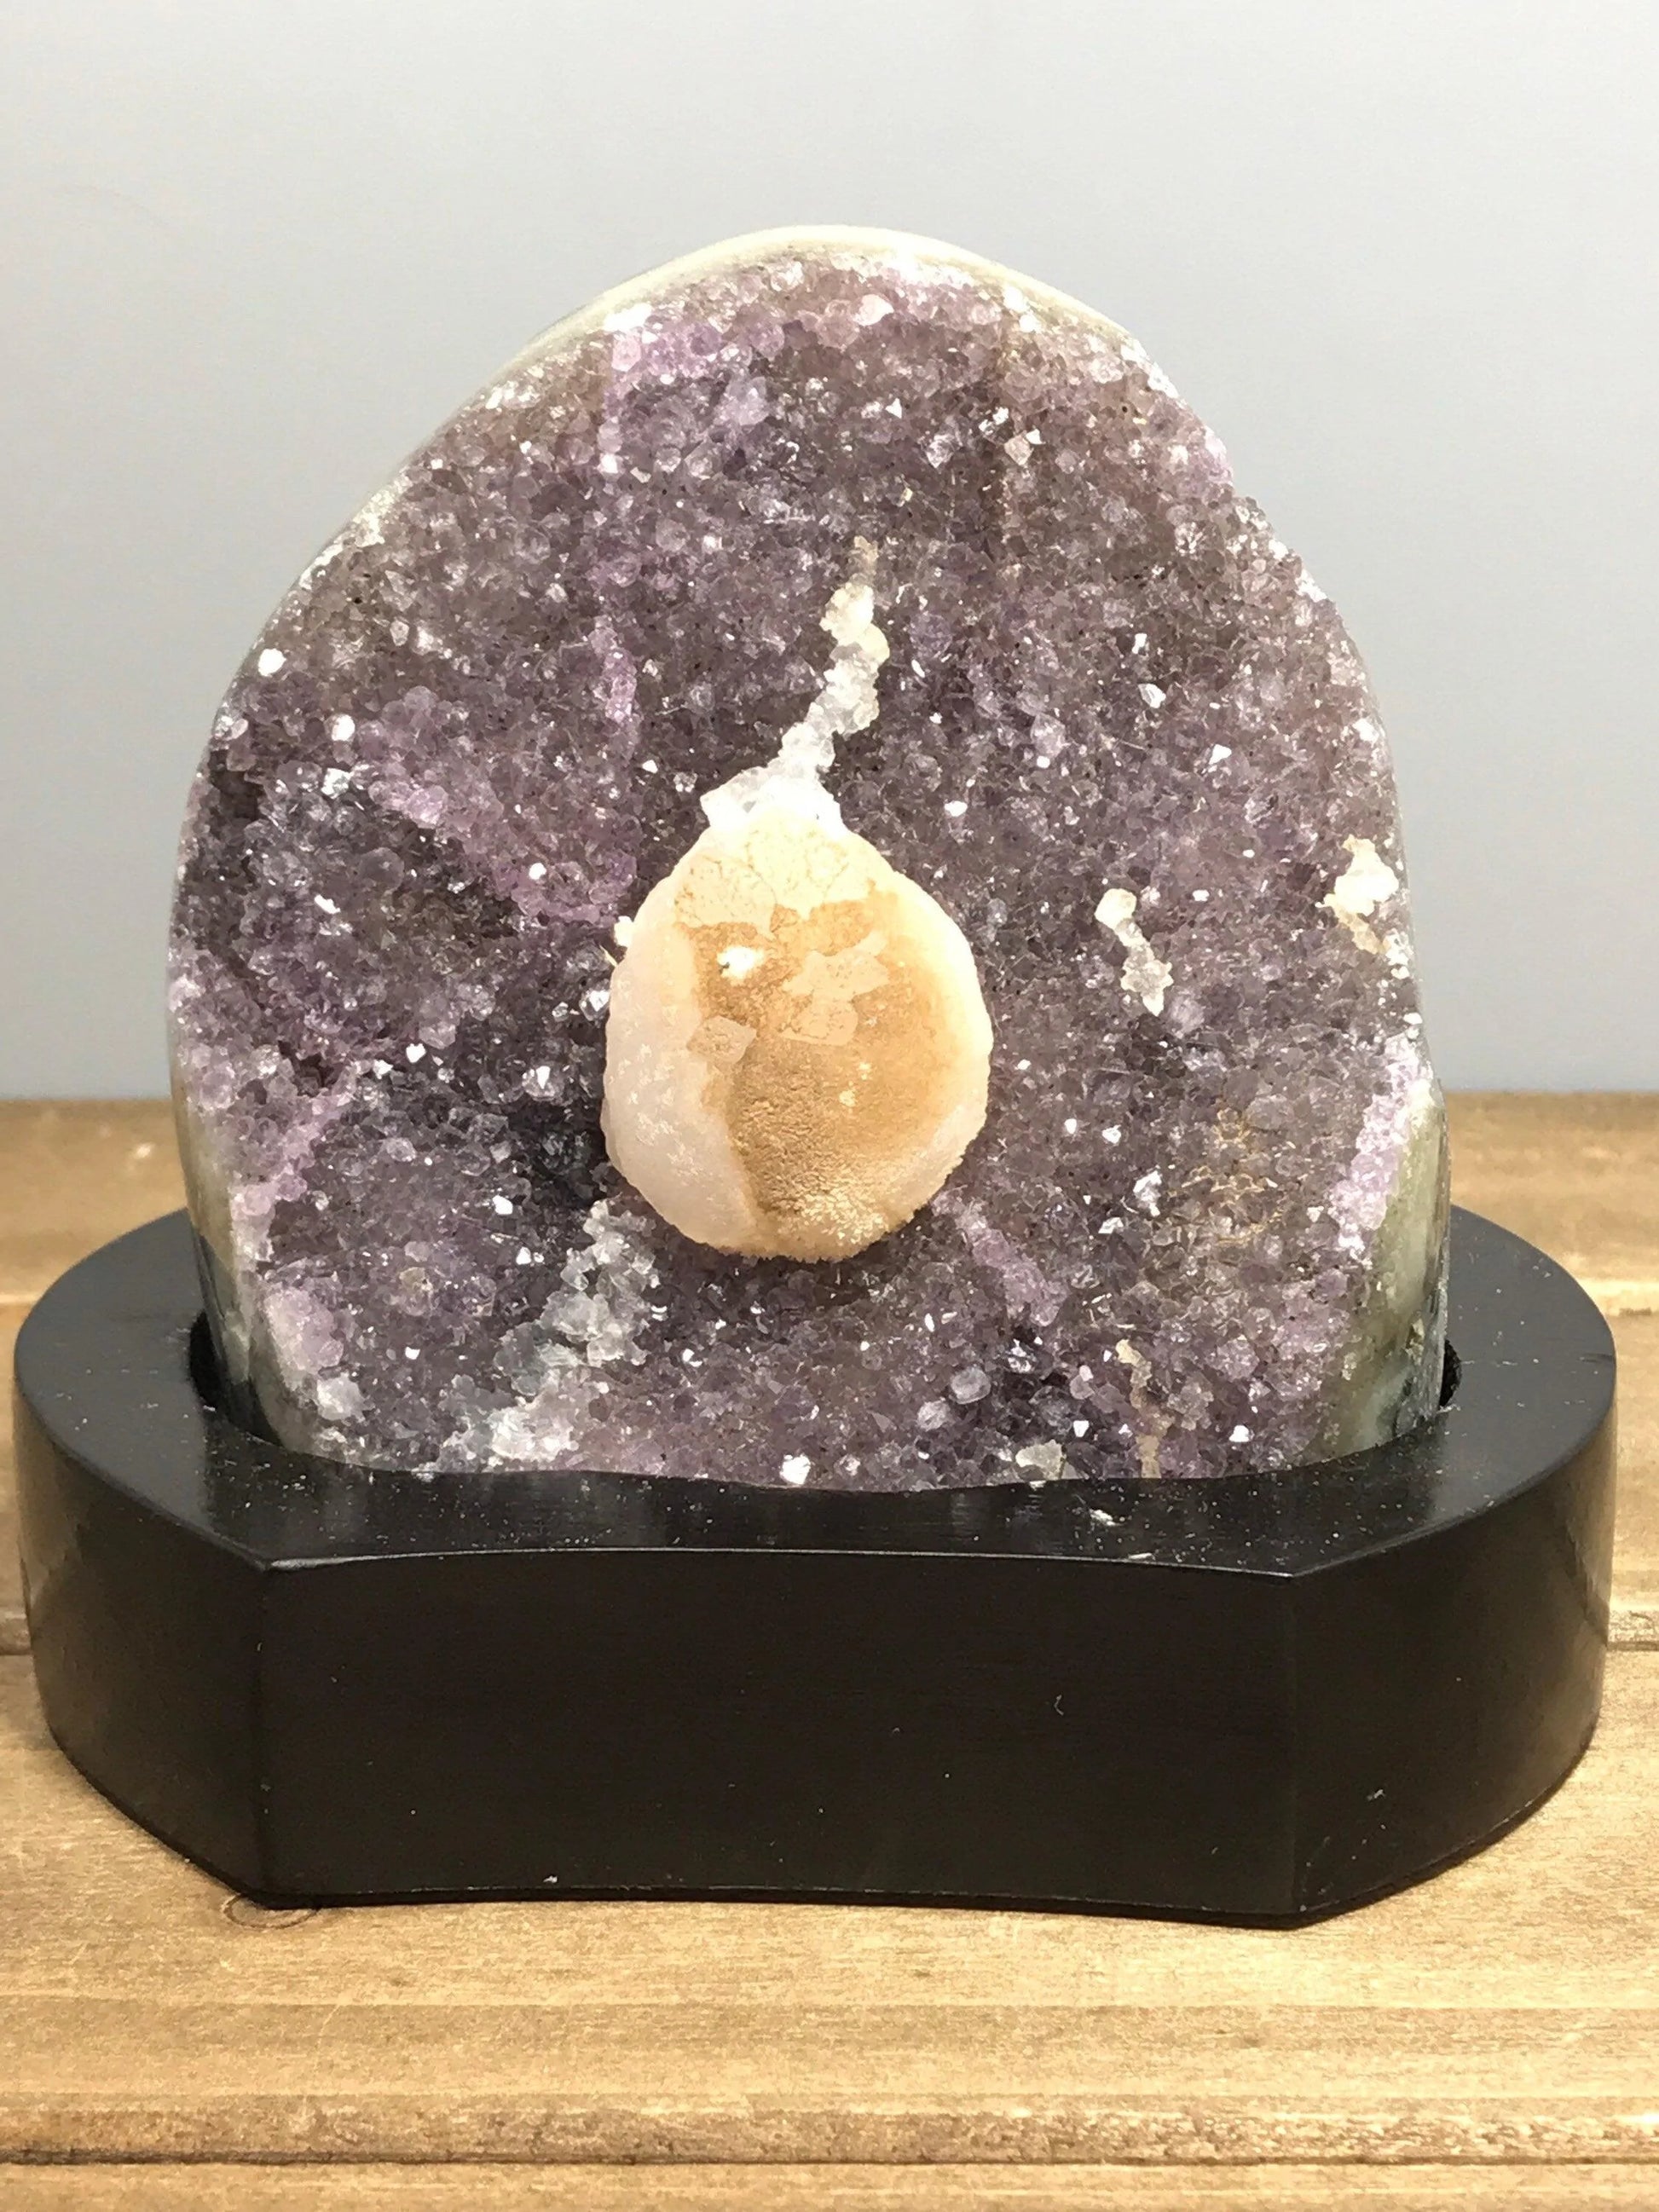 Amethyst geode with calcite on a wood base - RocciaRoba